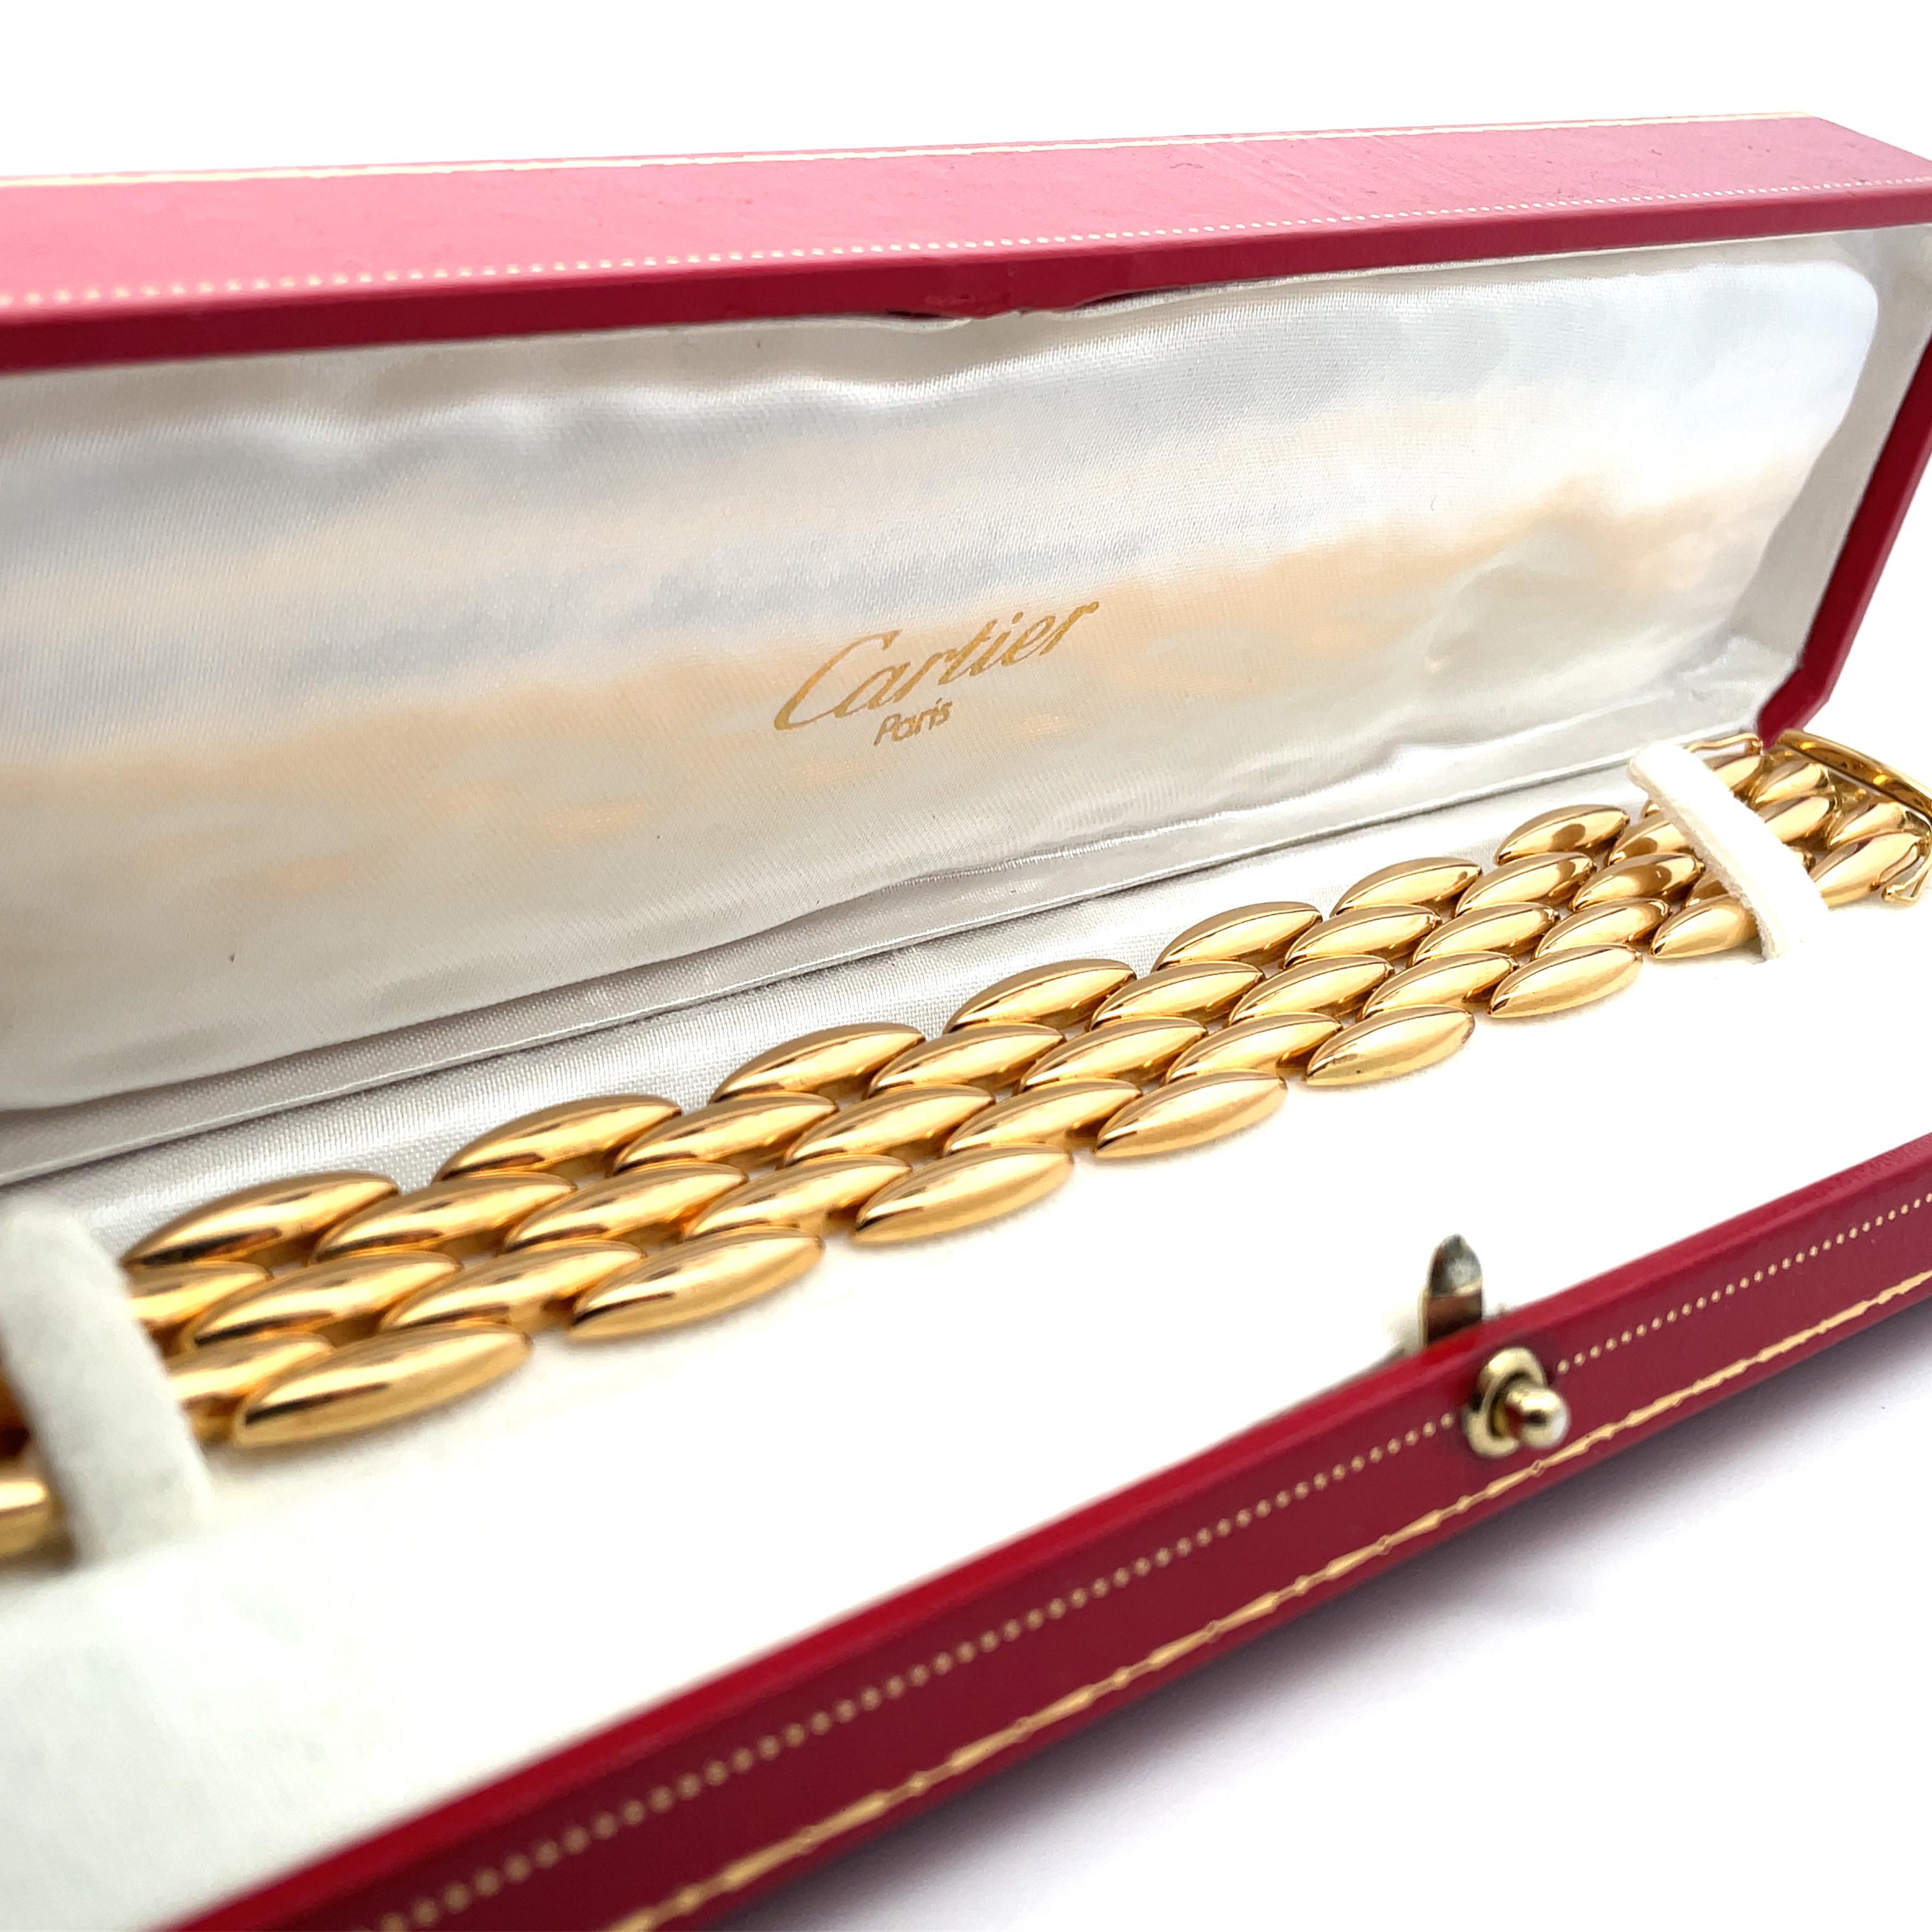 Cartier yellow five row bracelet, circa 1990
A rare retro bracelet from Cartier's elegant Gentiane collection.
The bracelet is comprised of five rows each segment designed as an elongated lozenge shape crafted in 18 karat yellow gold with a fine